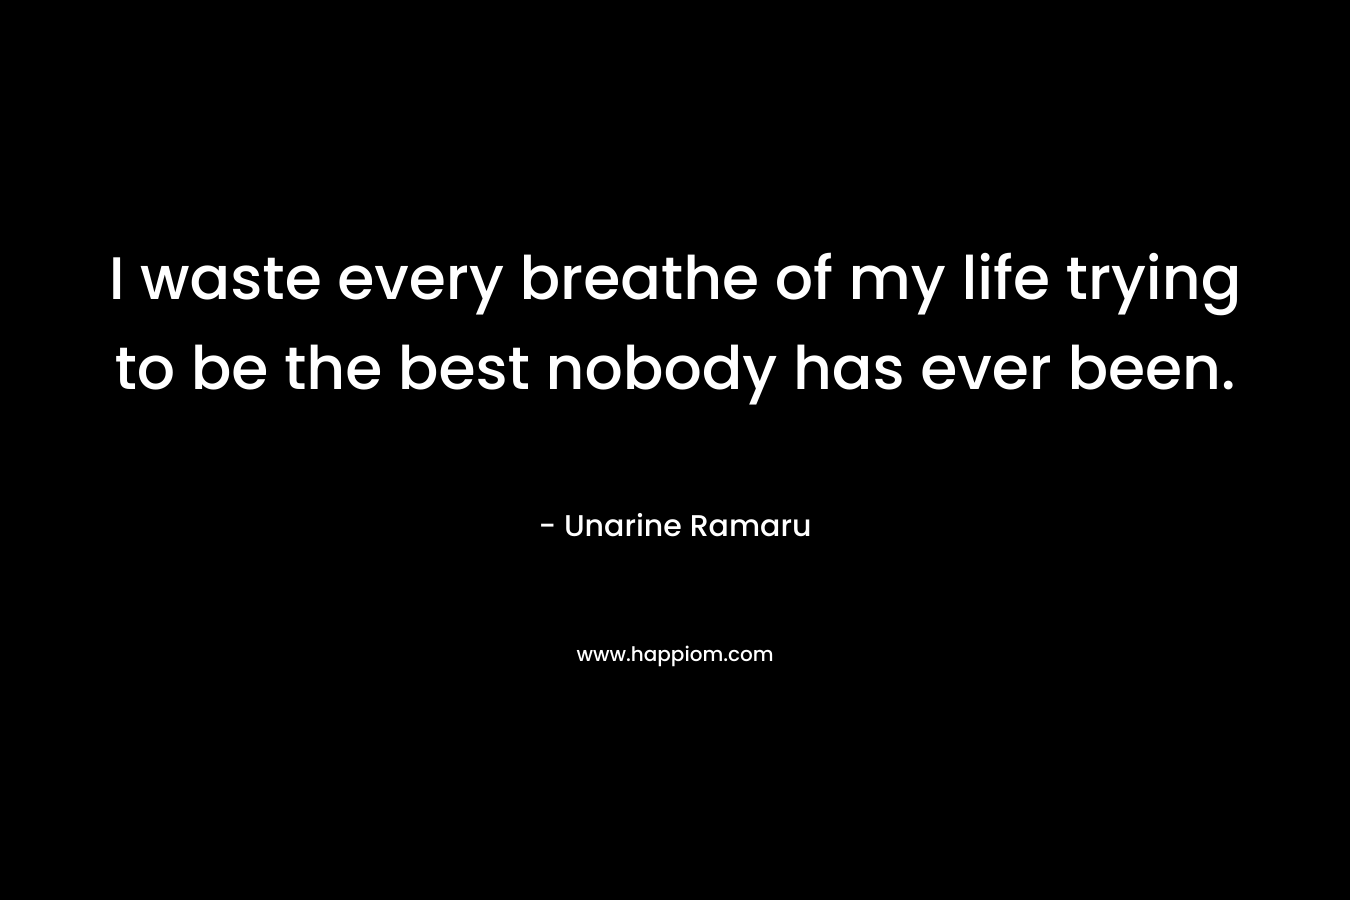 I waste every breathe of my life trying to be the best nobody has ever been. – Unarine Ramaru